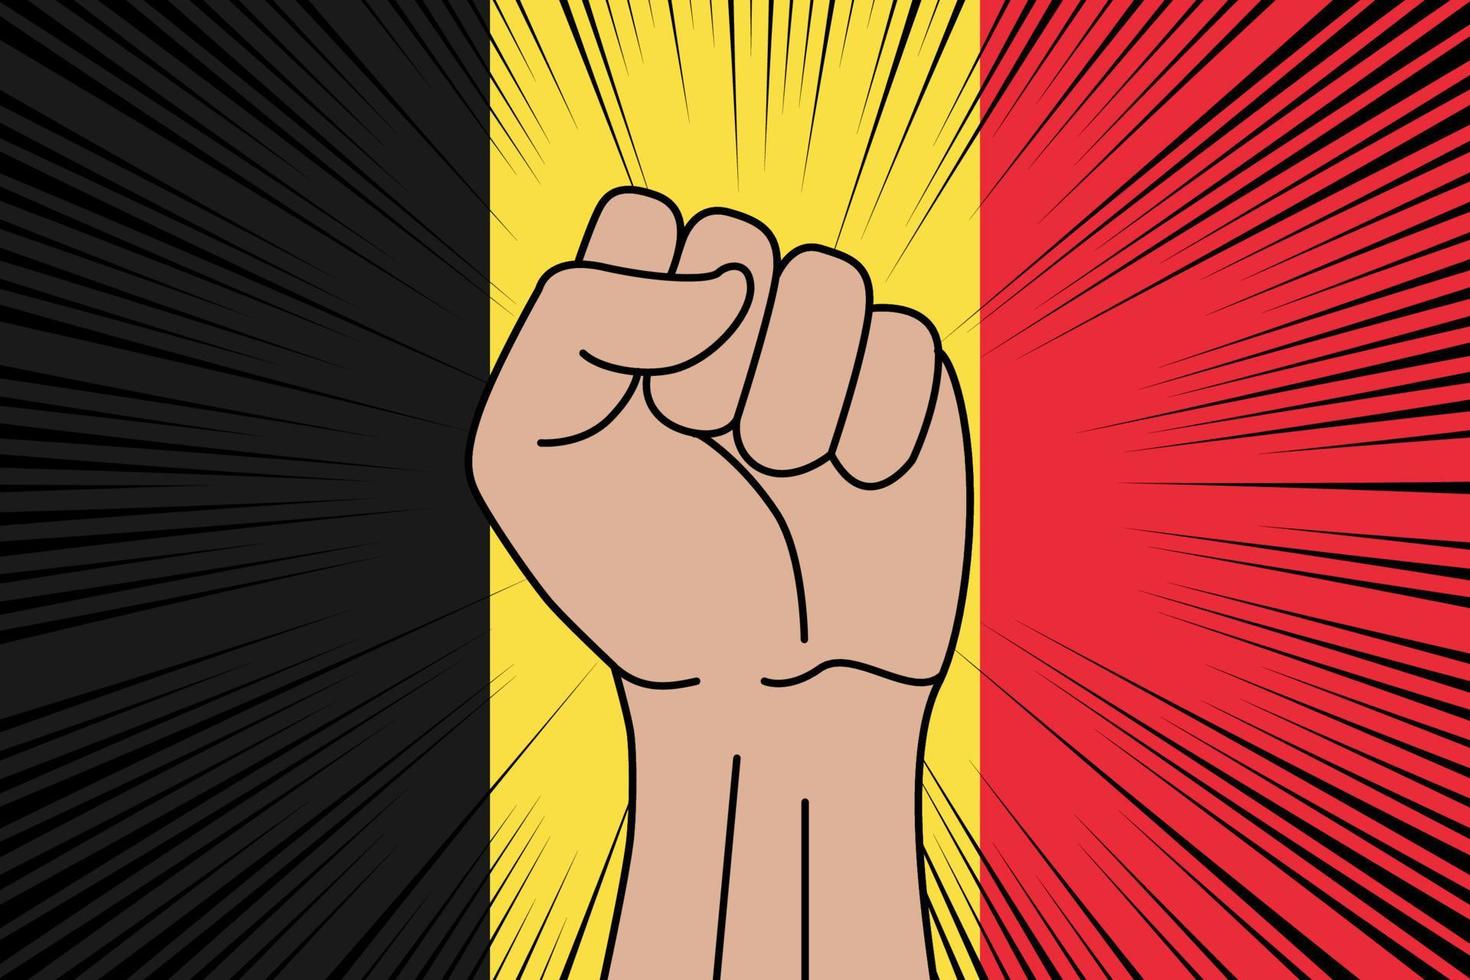 Human fist clenched symbol on flag of Belgium vector